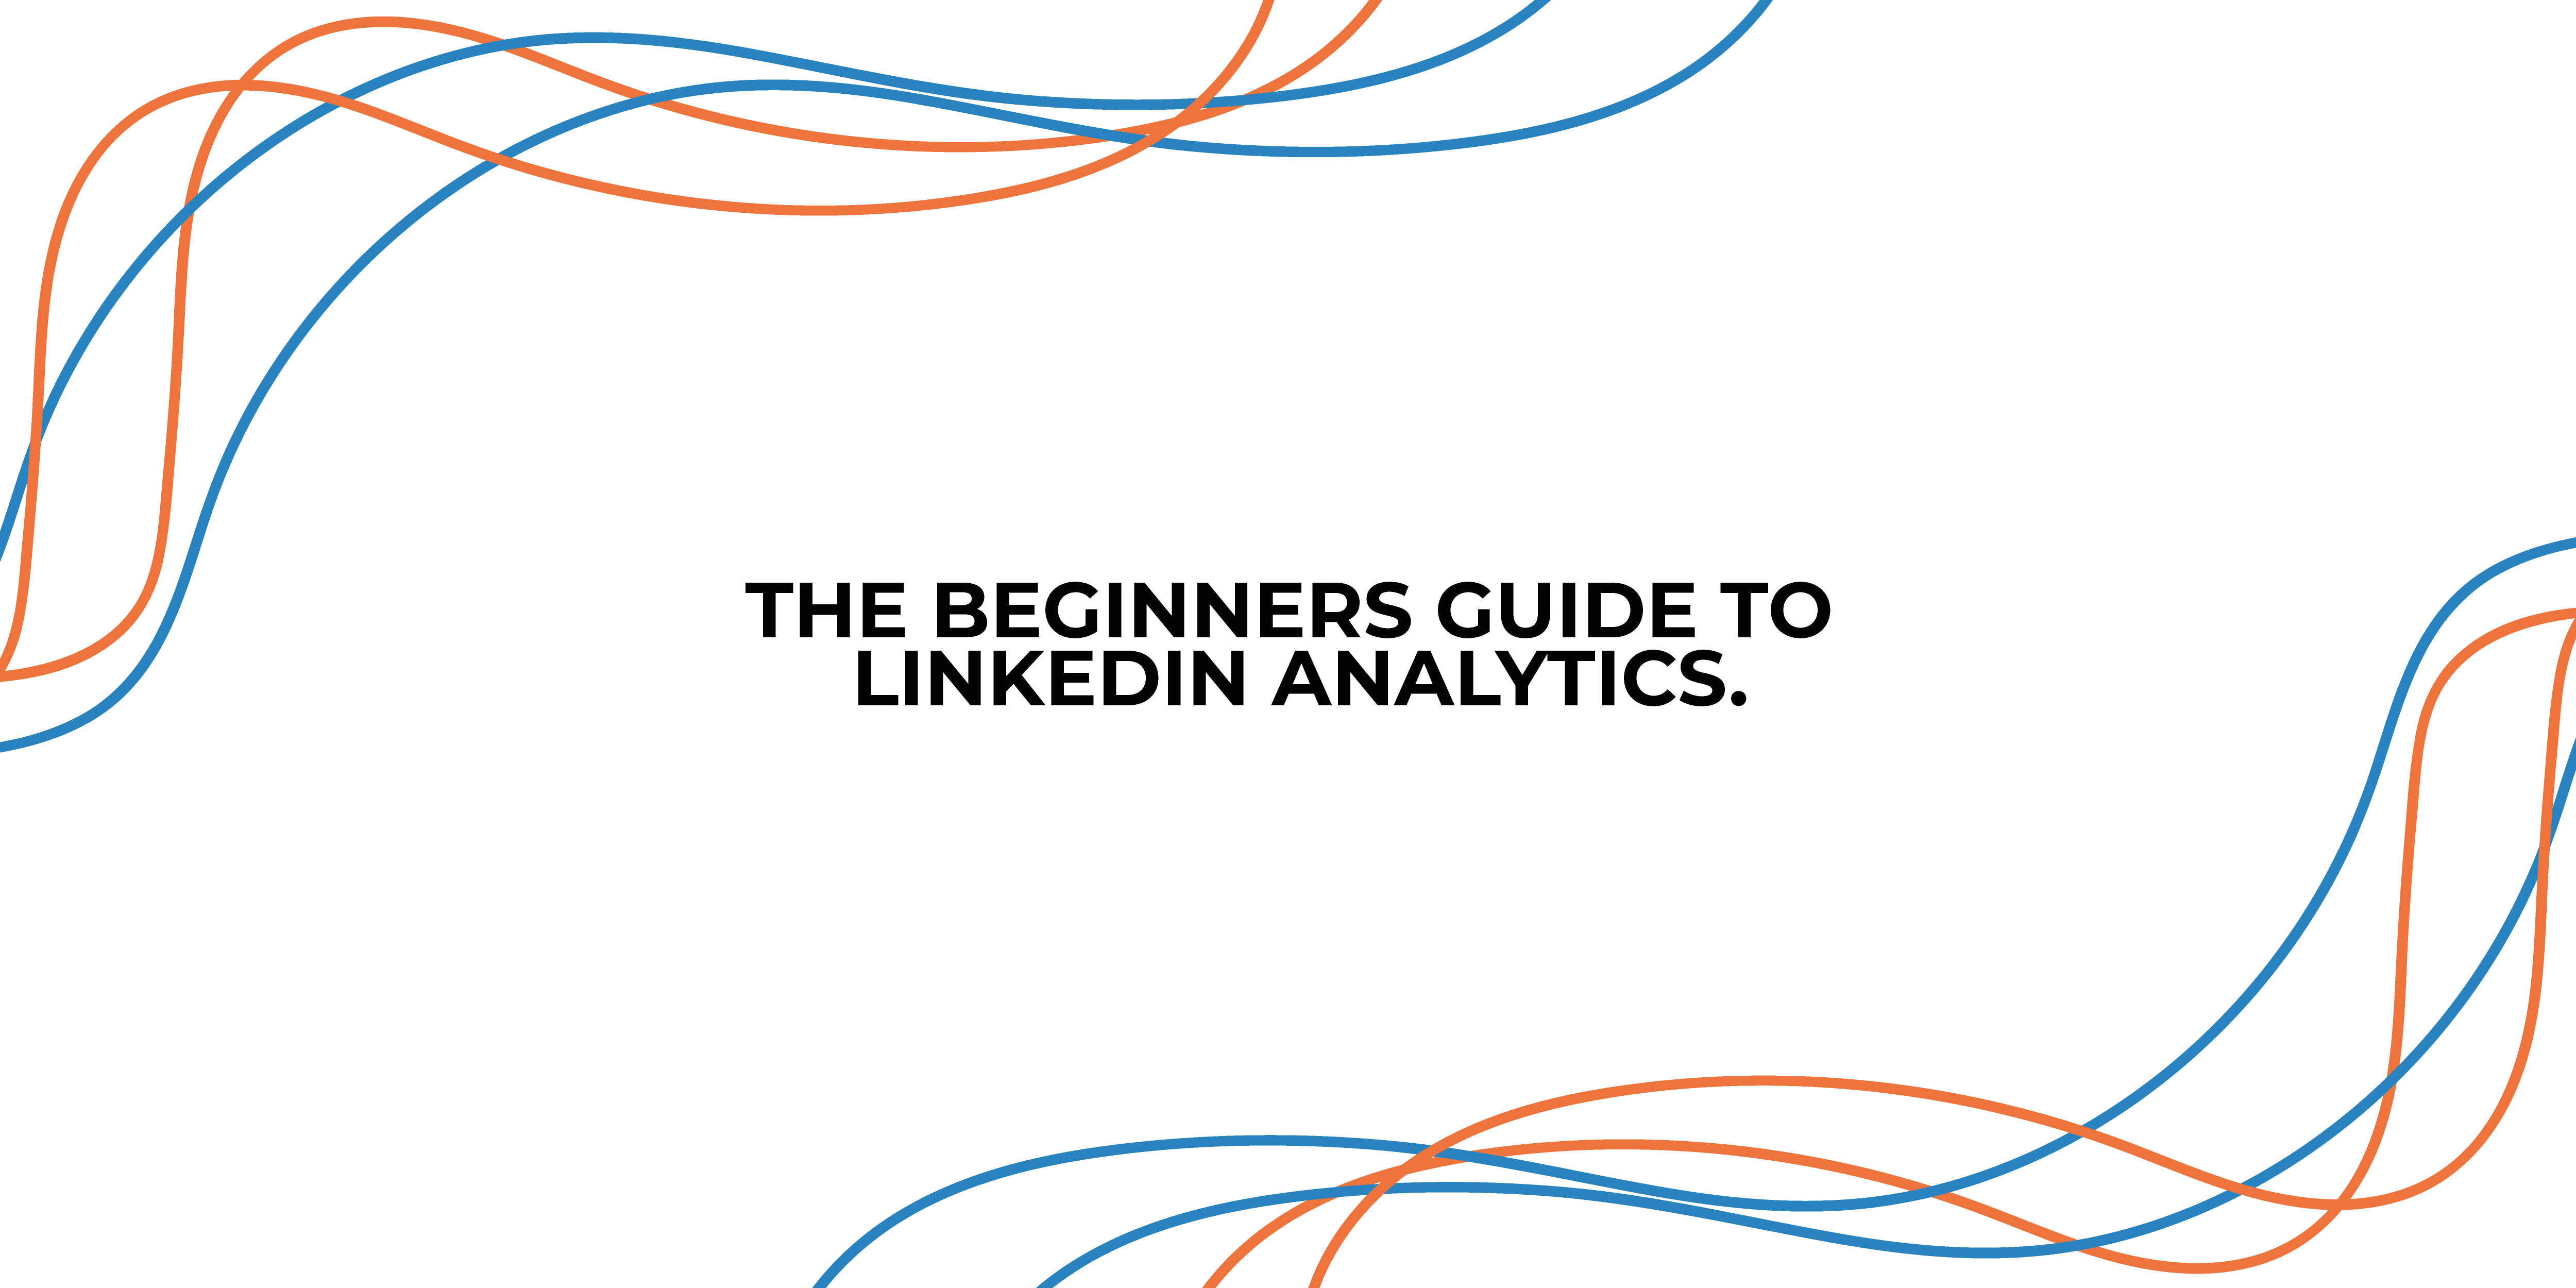 THE BEGINNERS GUIDE TO LINKEDIN ANALYTICS.